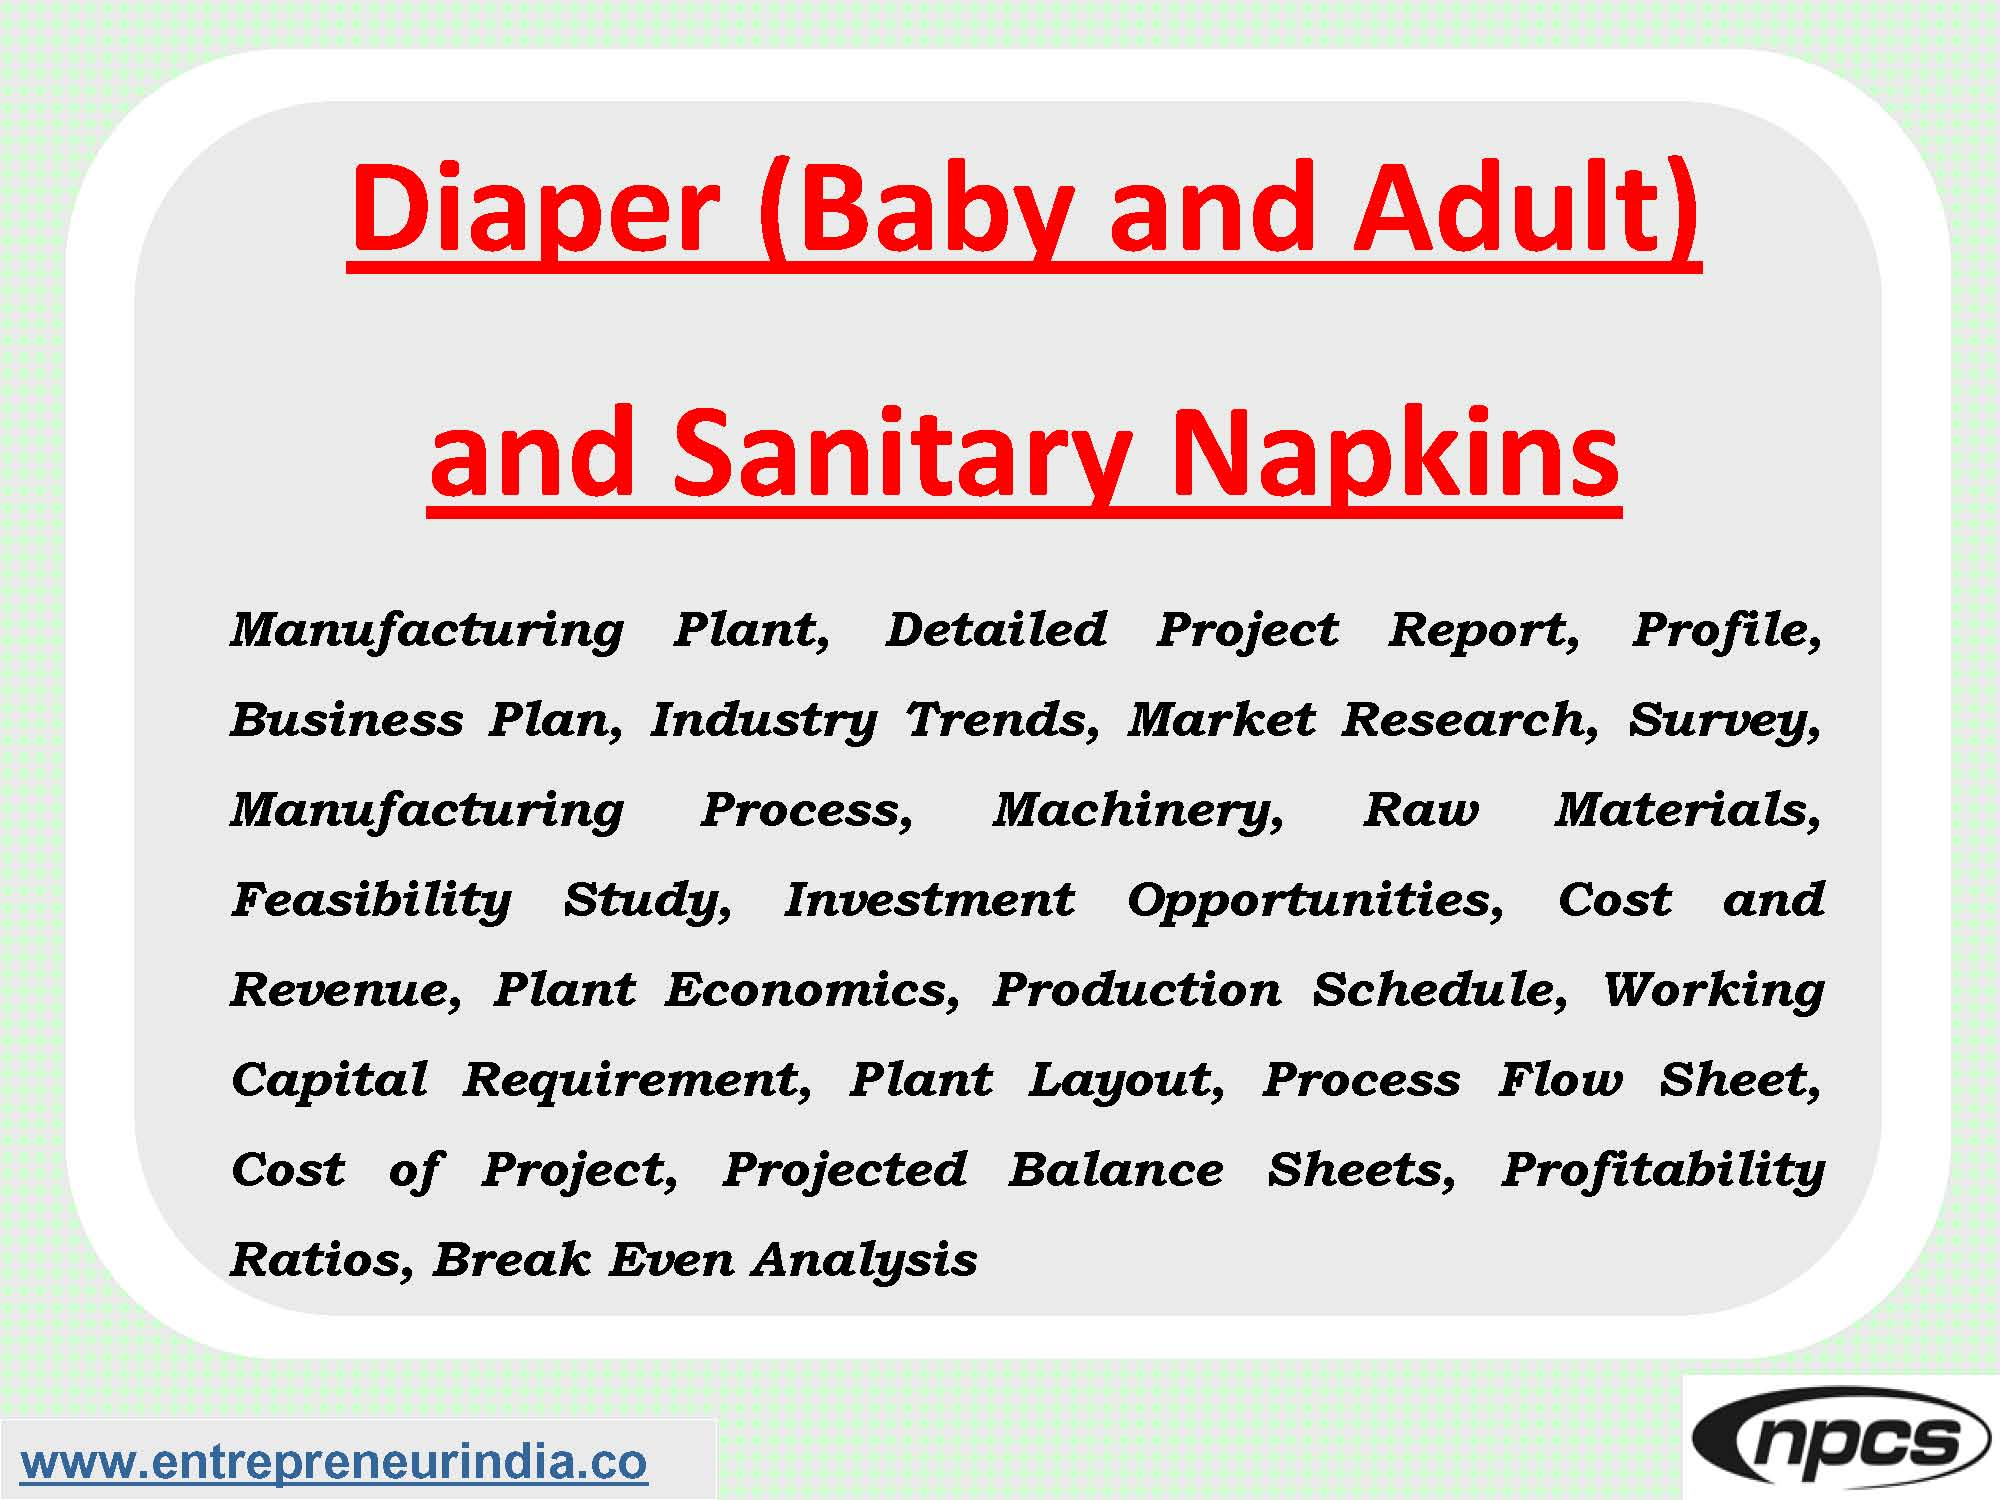 Diaper (Baby and Adult) and Sanitary Napkins